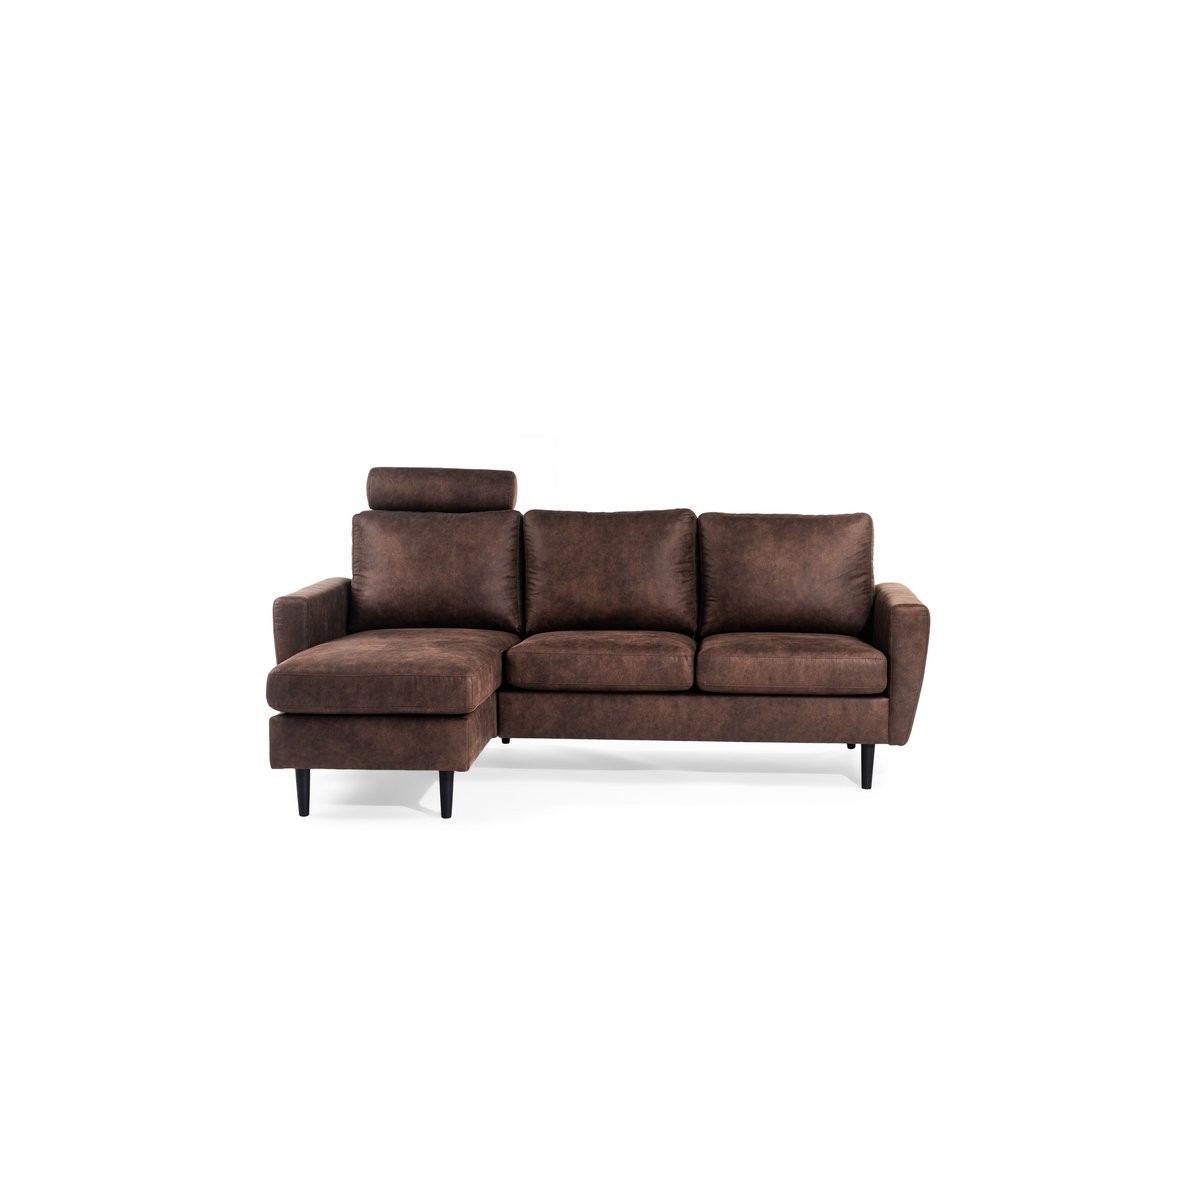 3 seater sofa CL L+R, with headrest, fabric Savannah, S430 brown